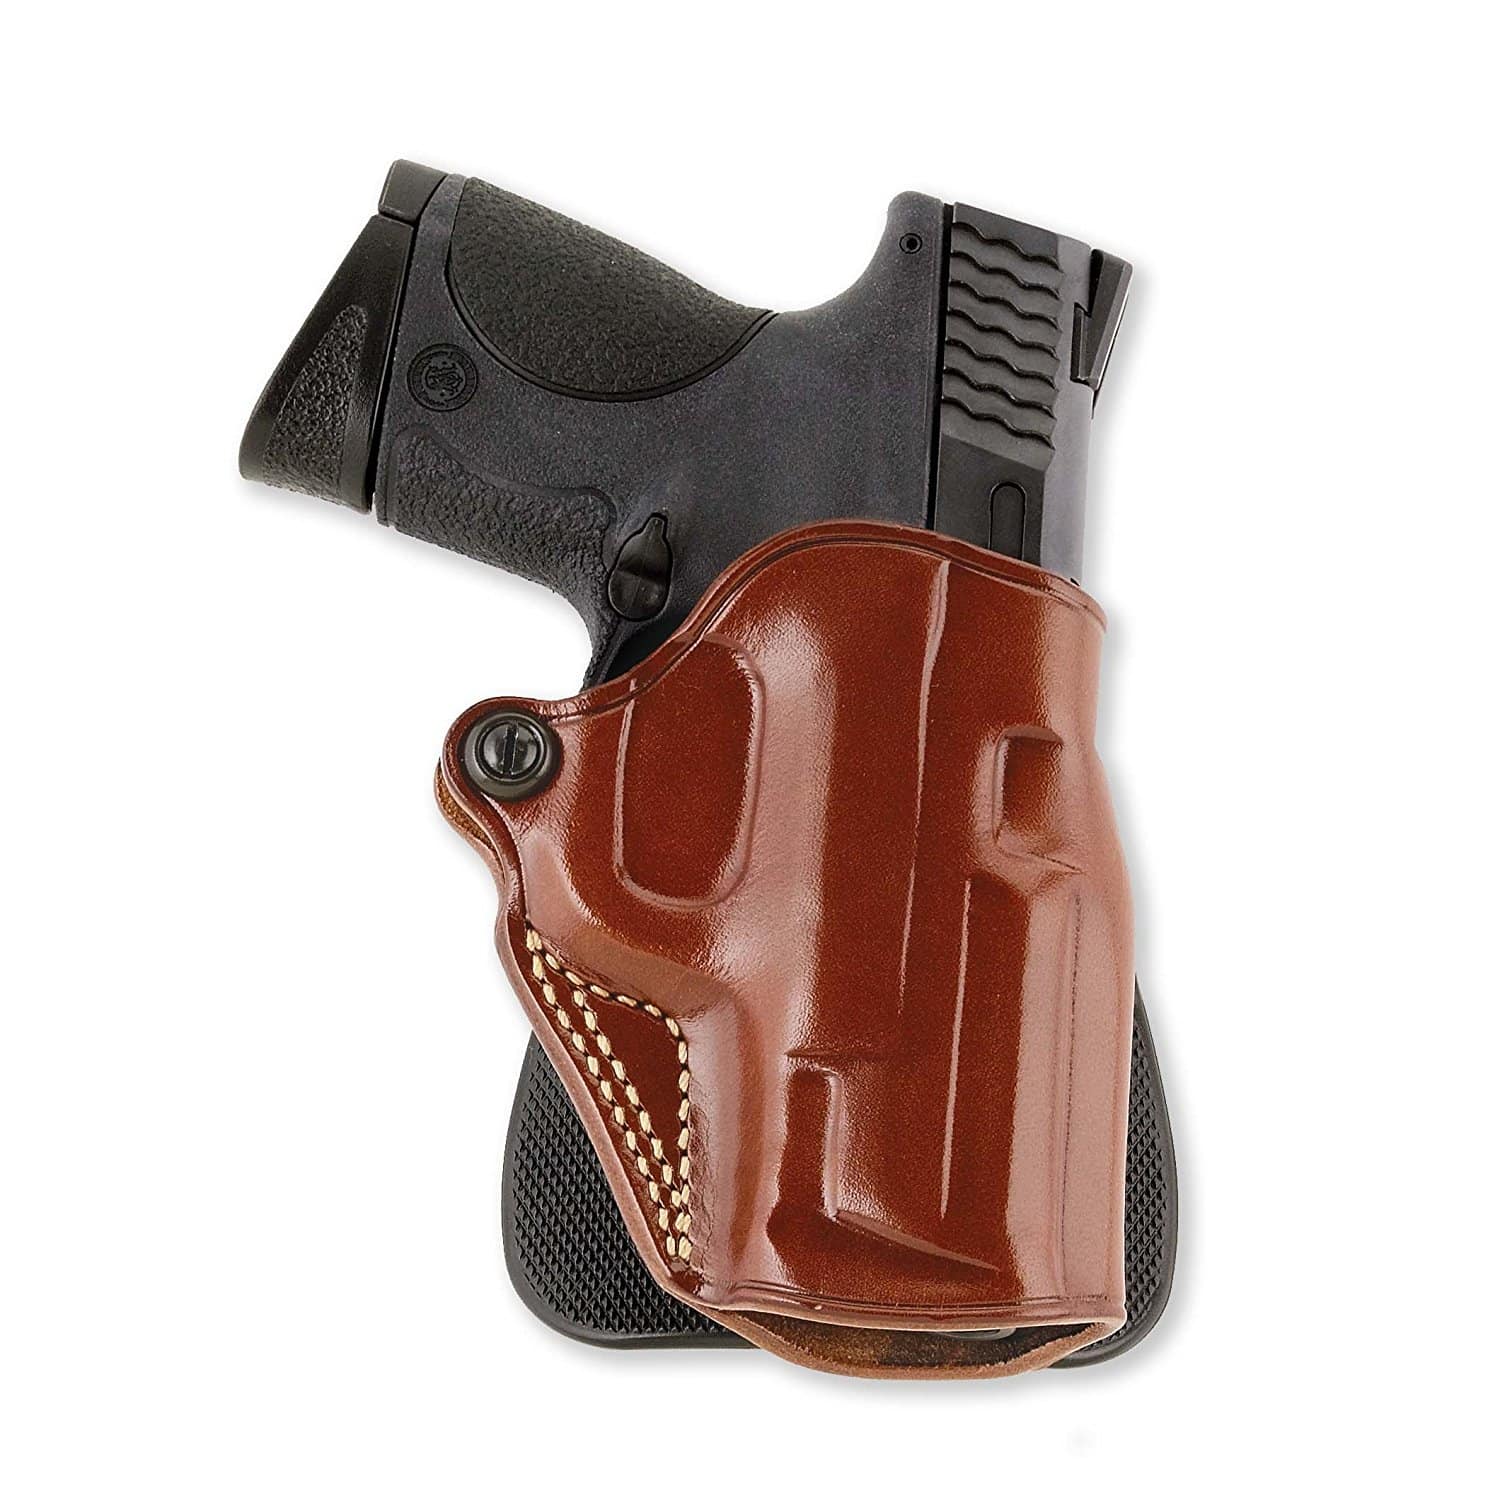 1911 PADDLE HOLSTER Options – Buying Guide